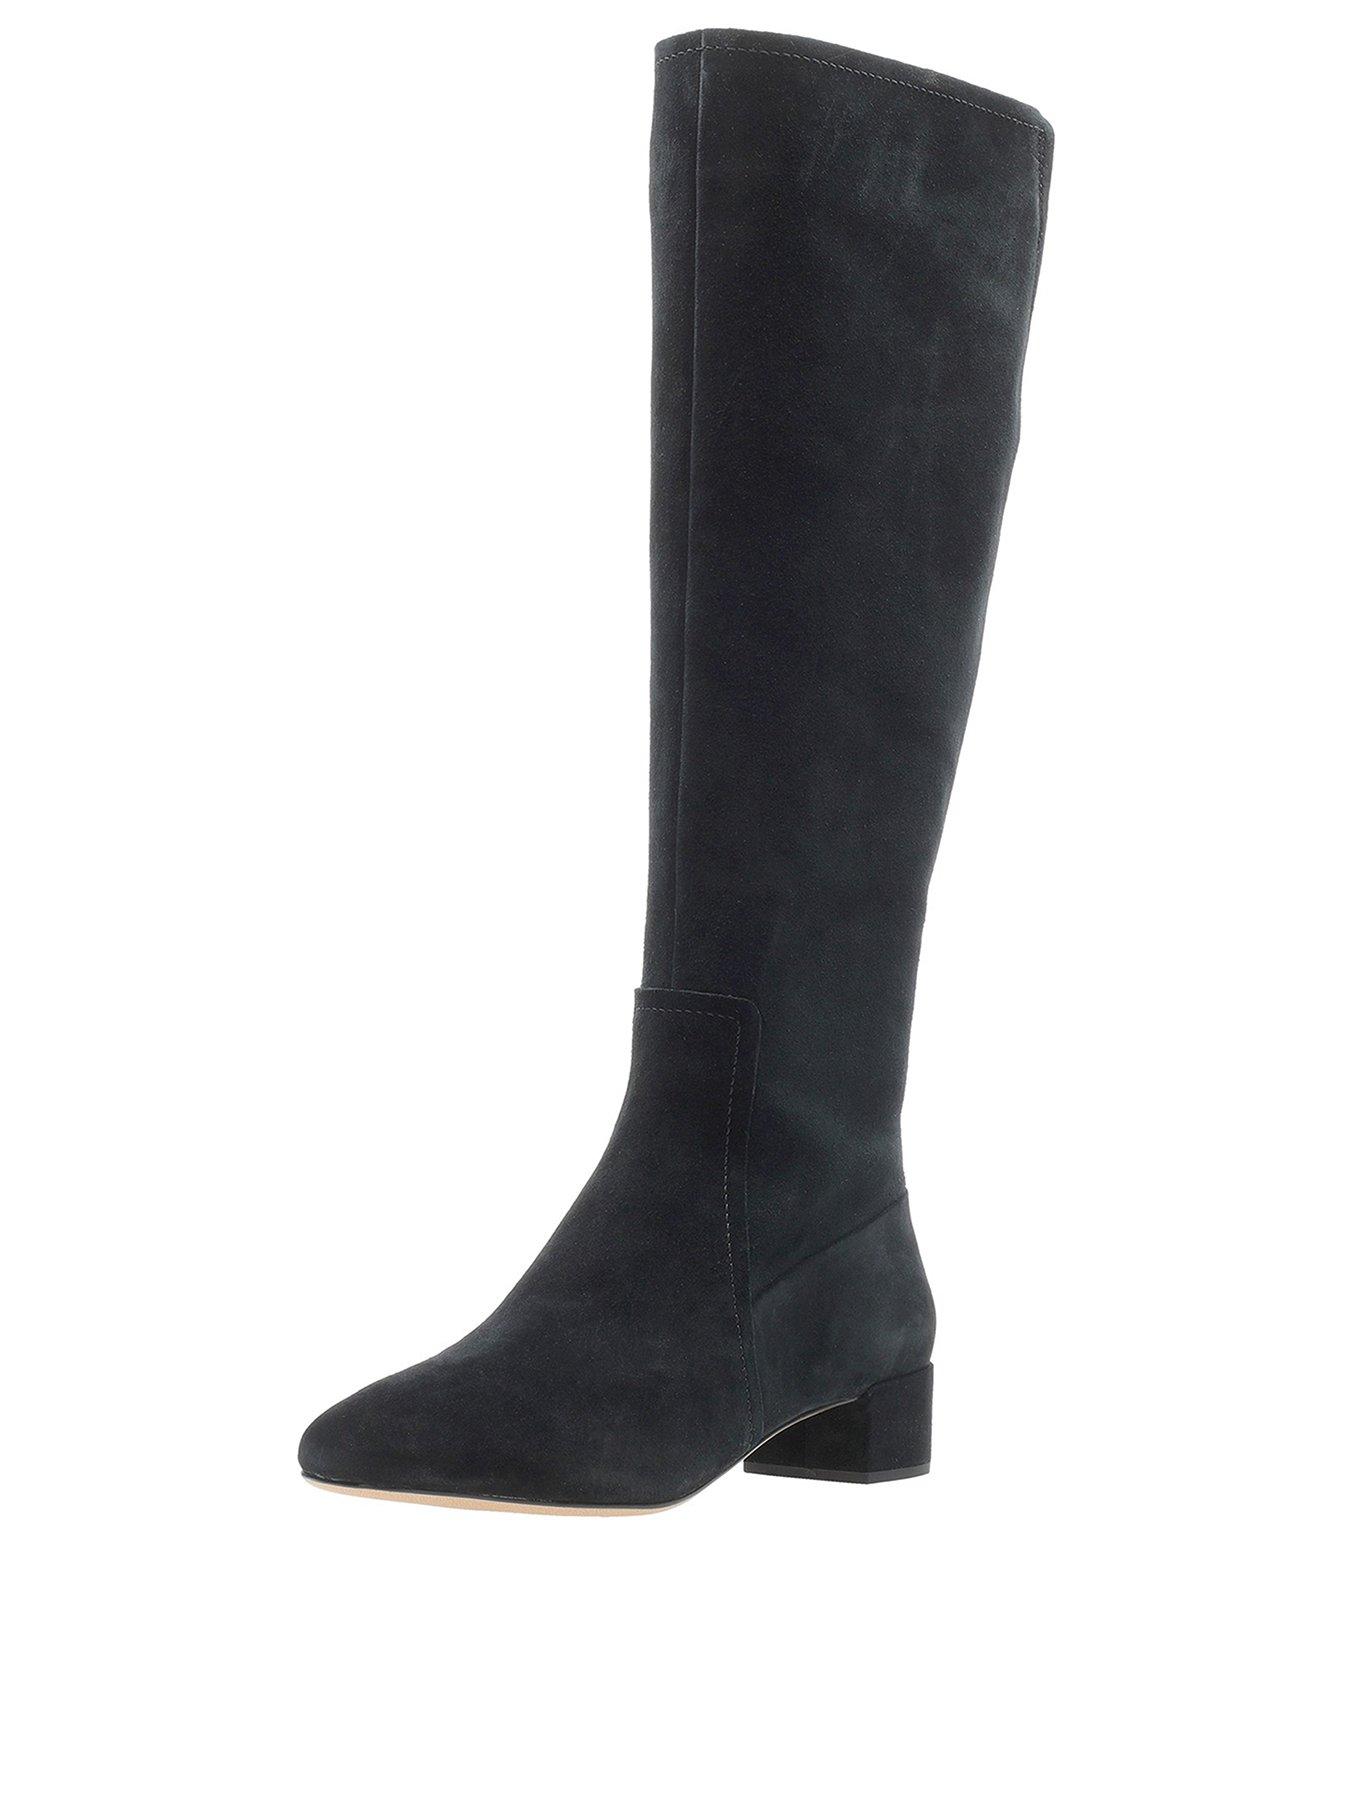 clarks suede knee high boots